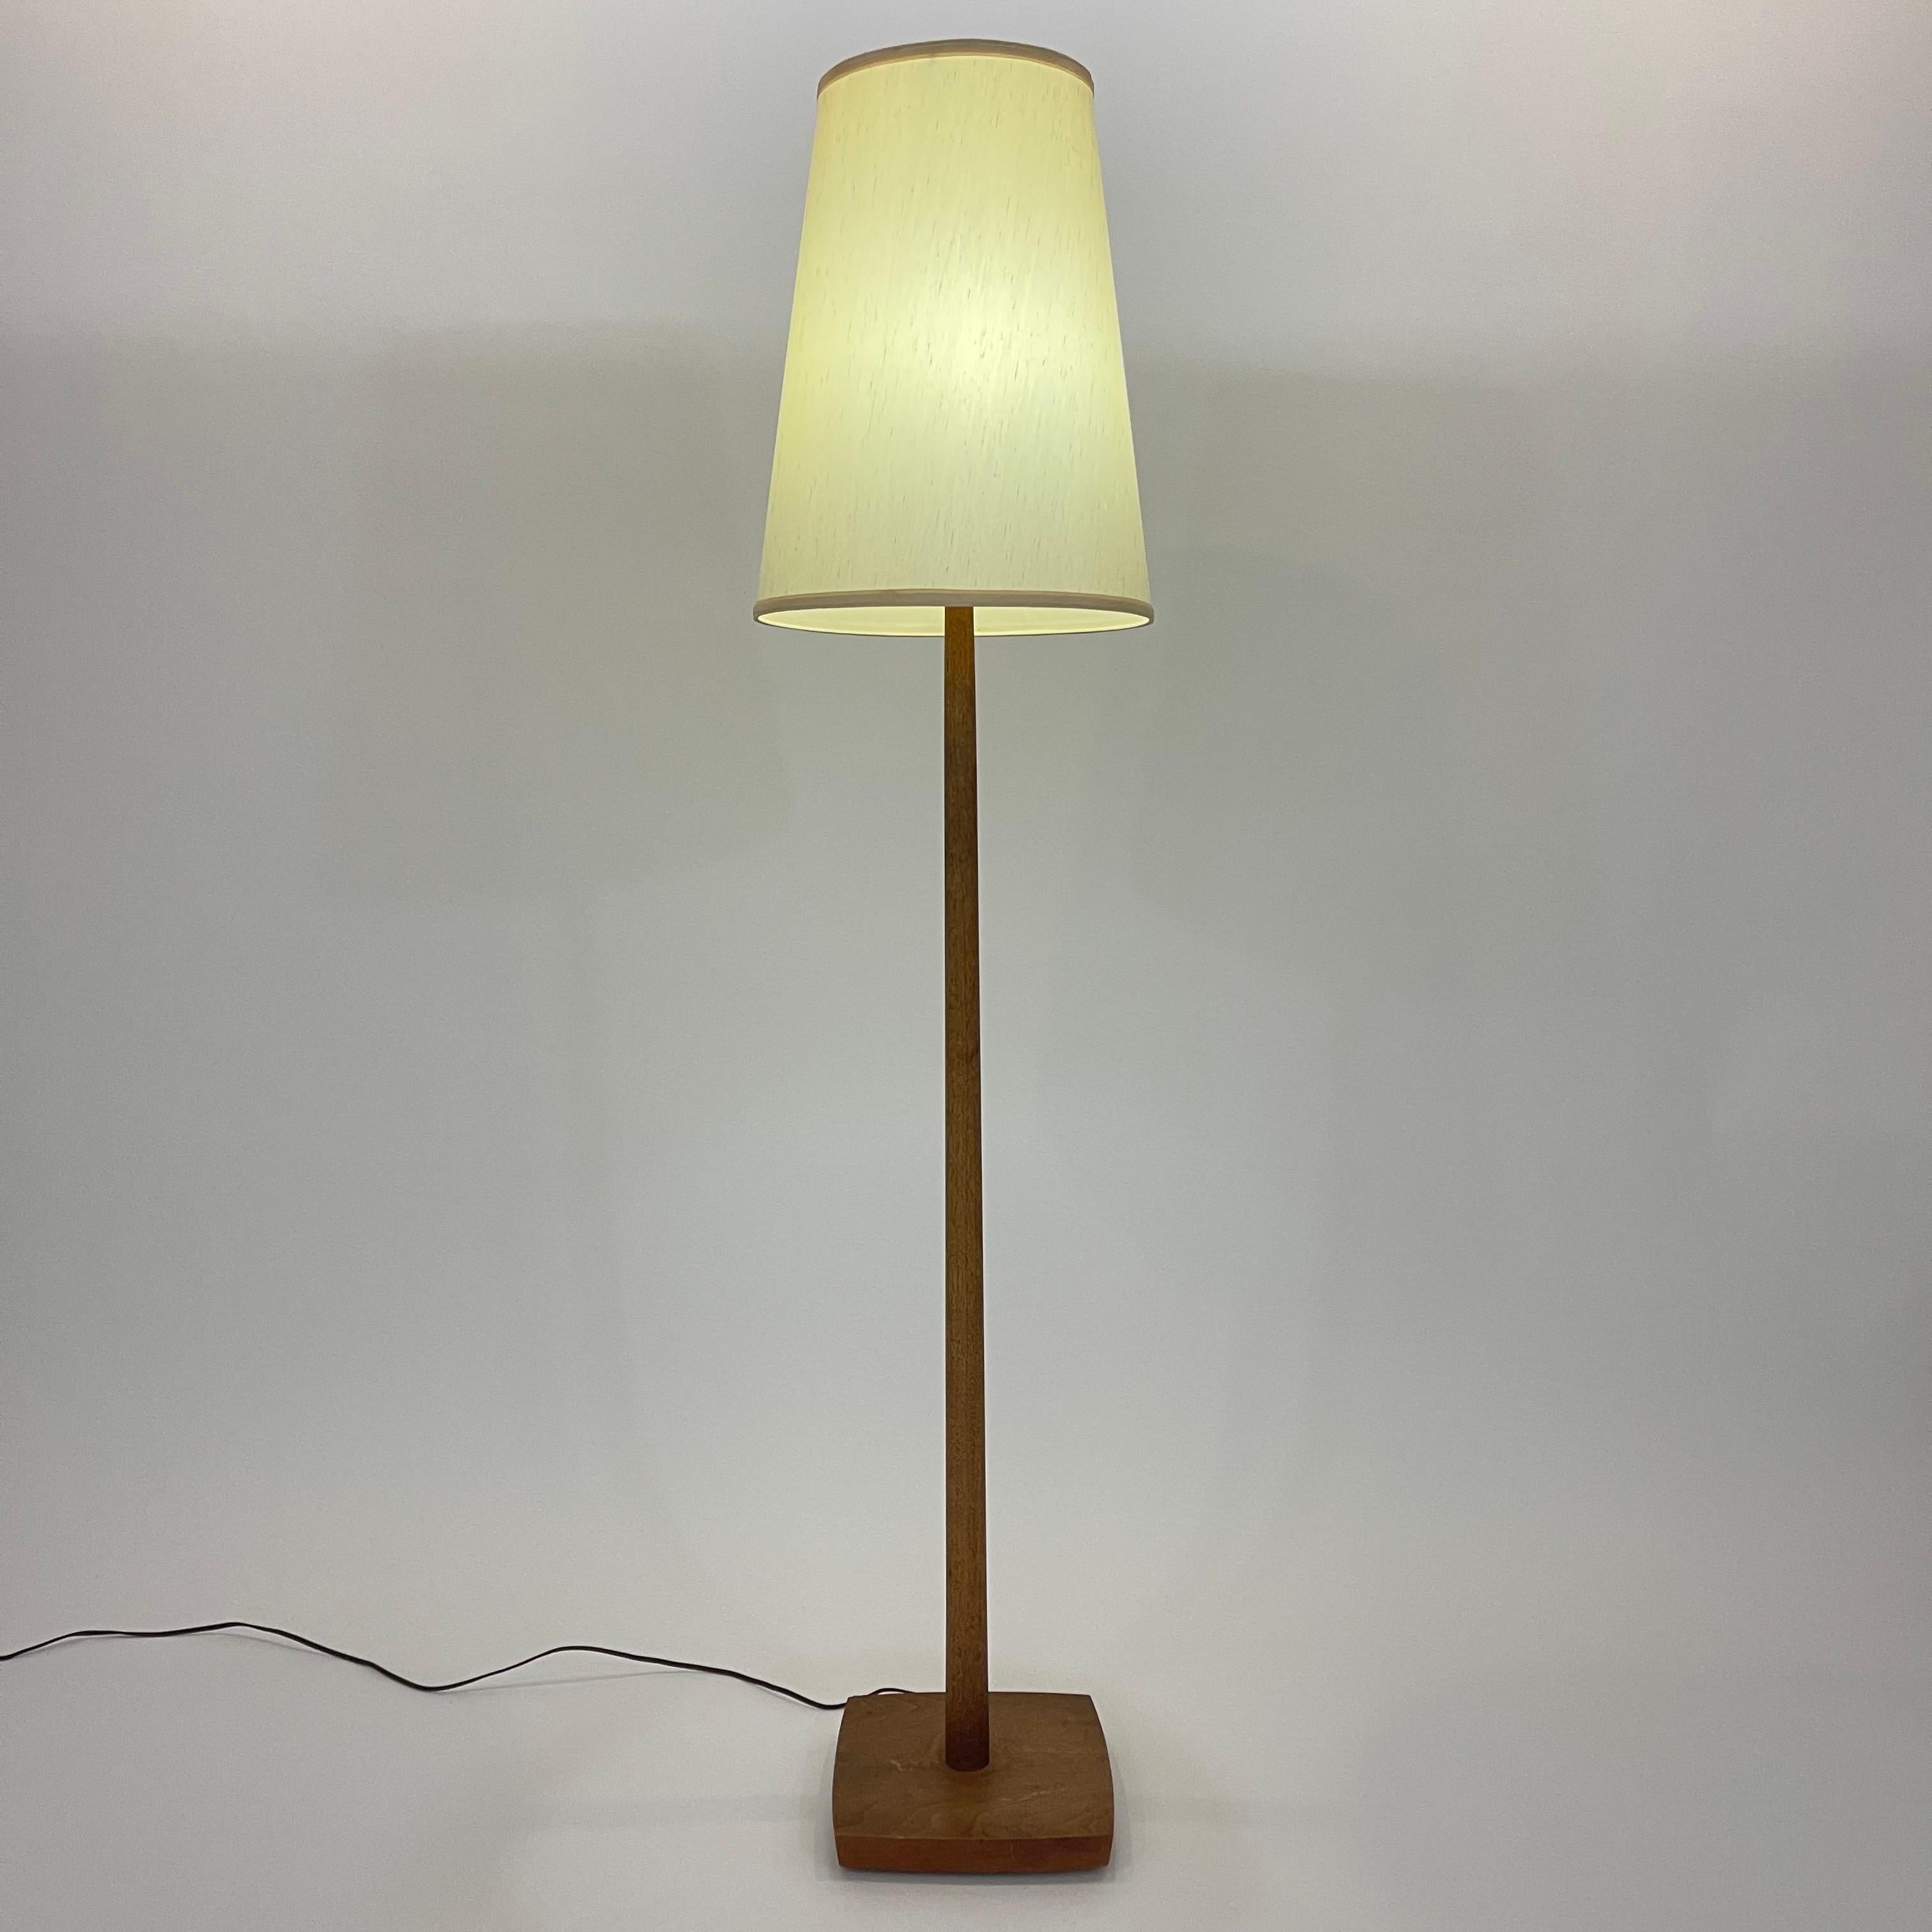 Scandinavian designer midcentury floor lamp rendered in turned teak with a curved squared base, retaining its original fabric shade. Sweden, 1960s